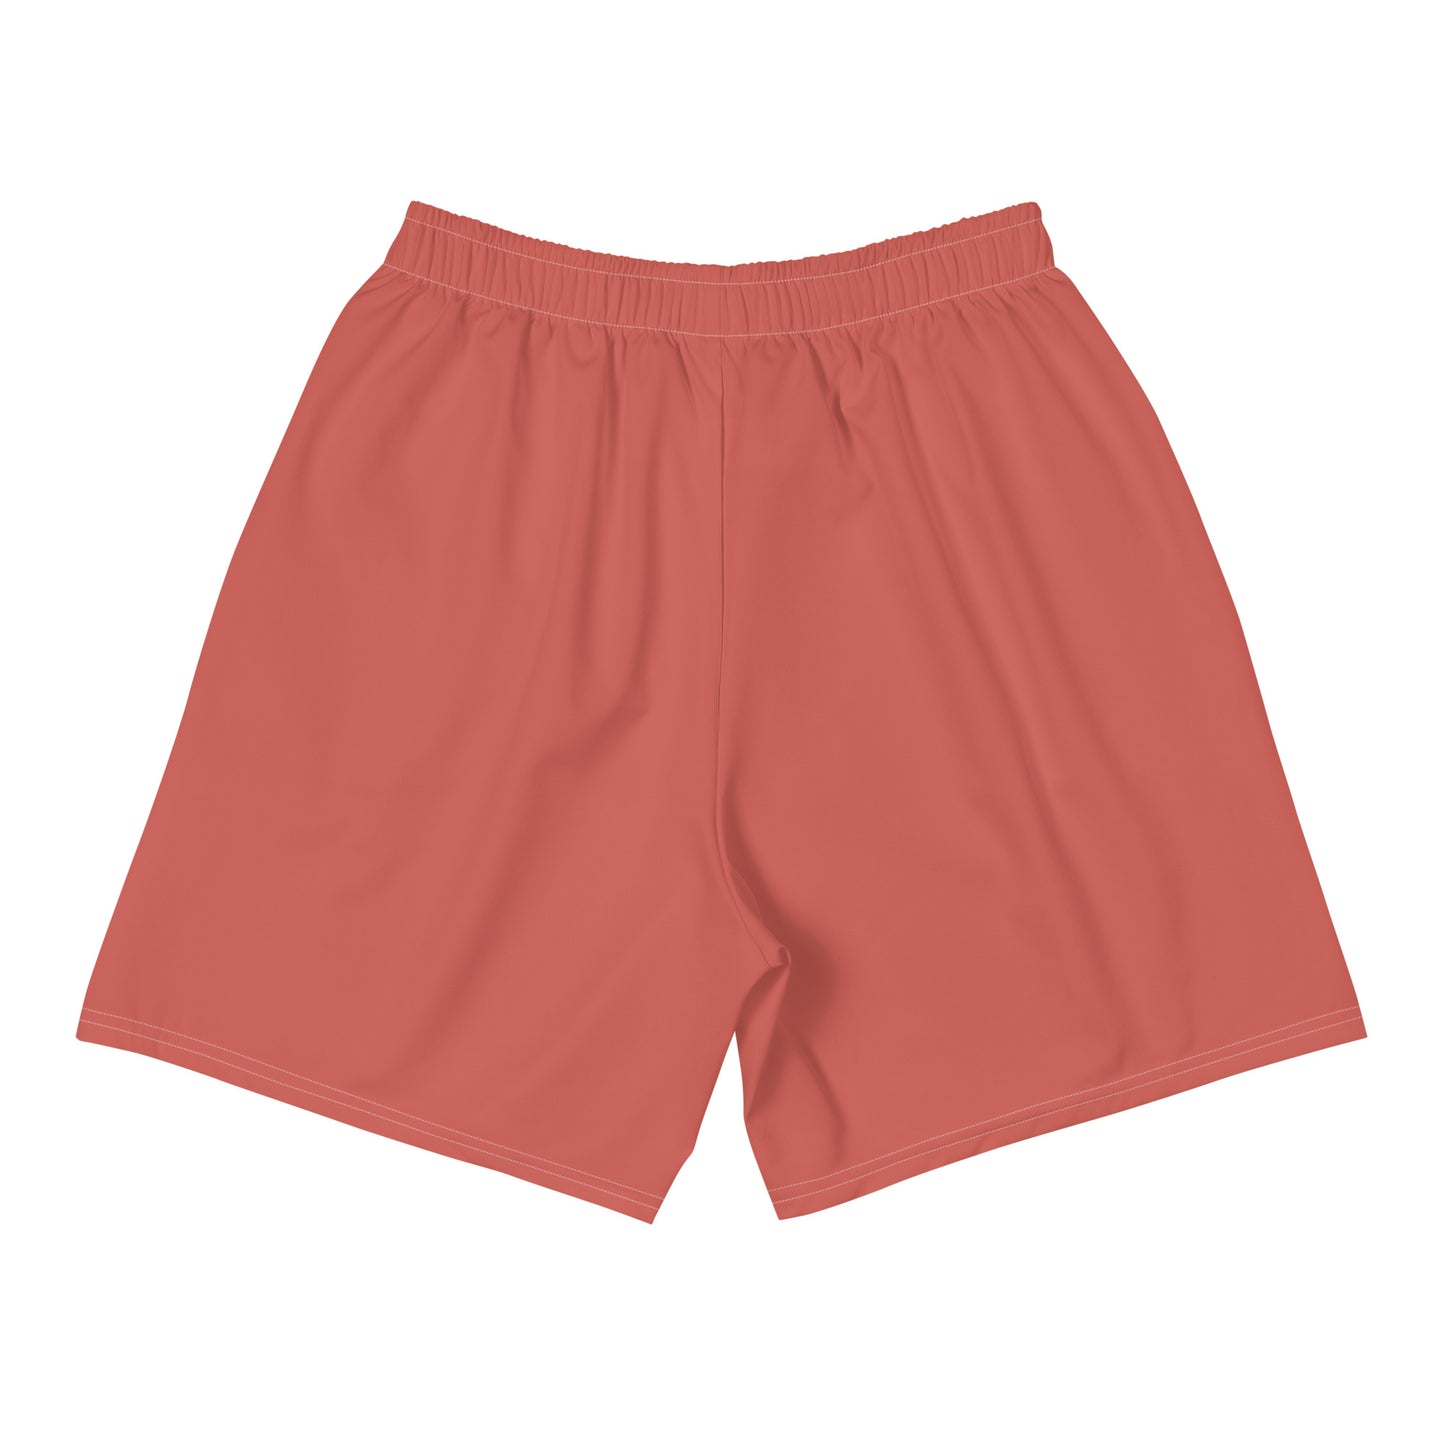 Heart - Inspired By Taylor Swift - Sustainably Made Men's Shorts